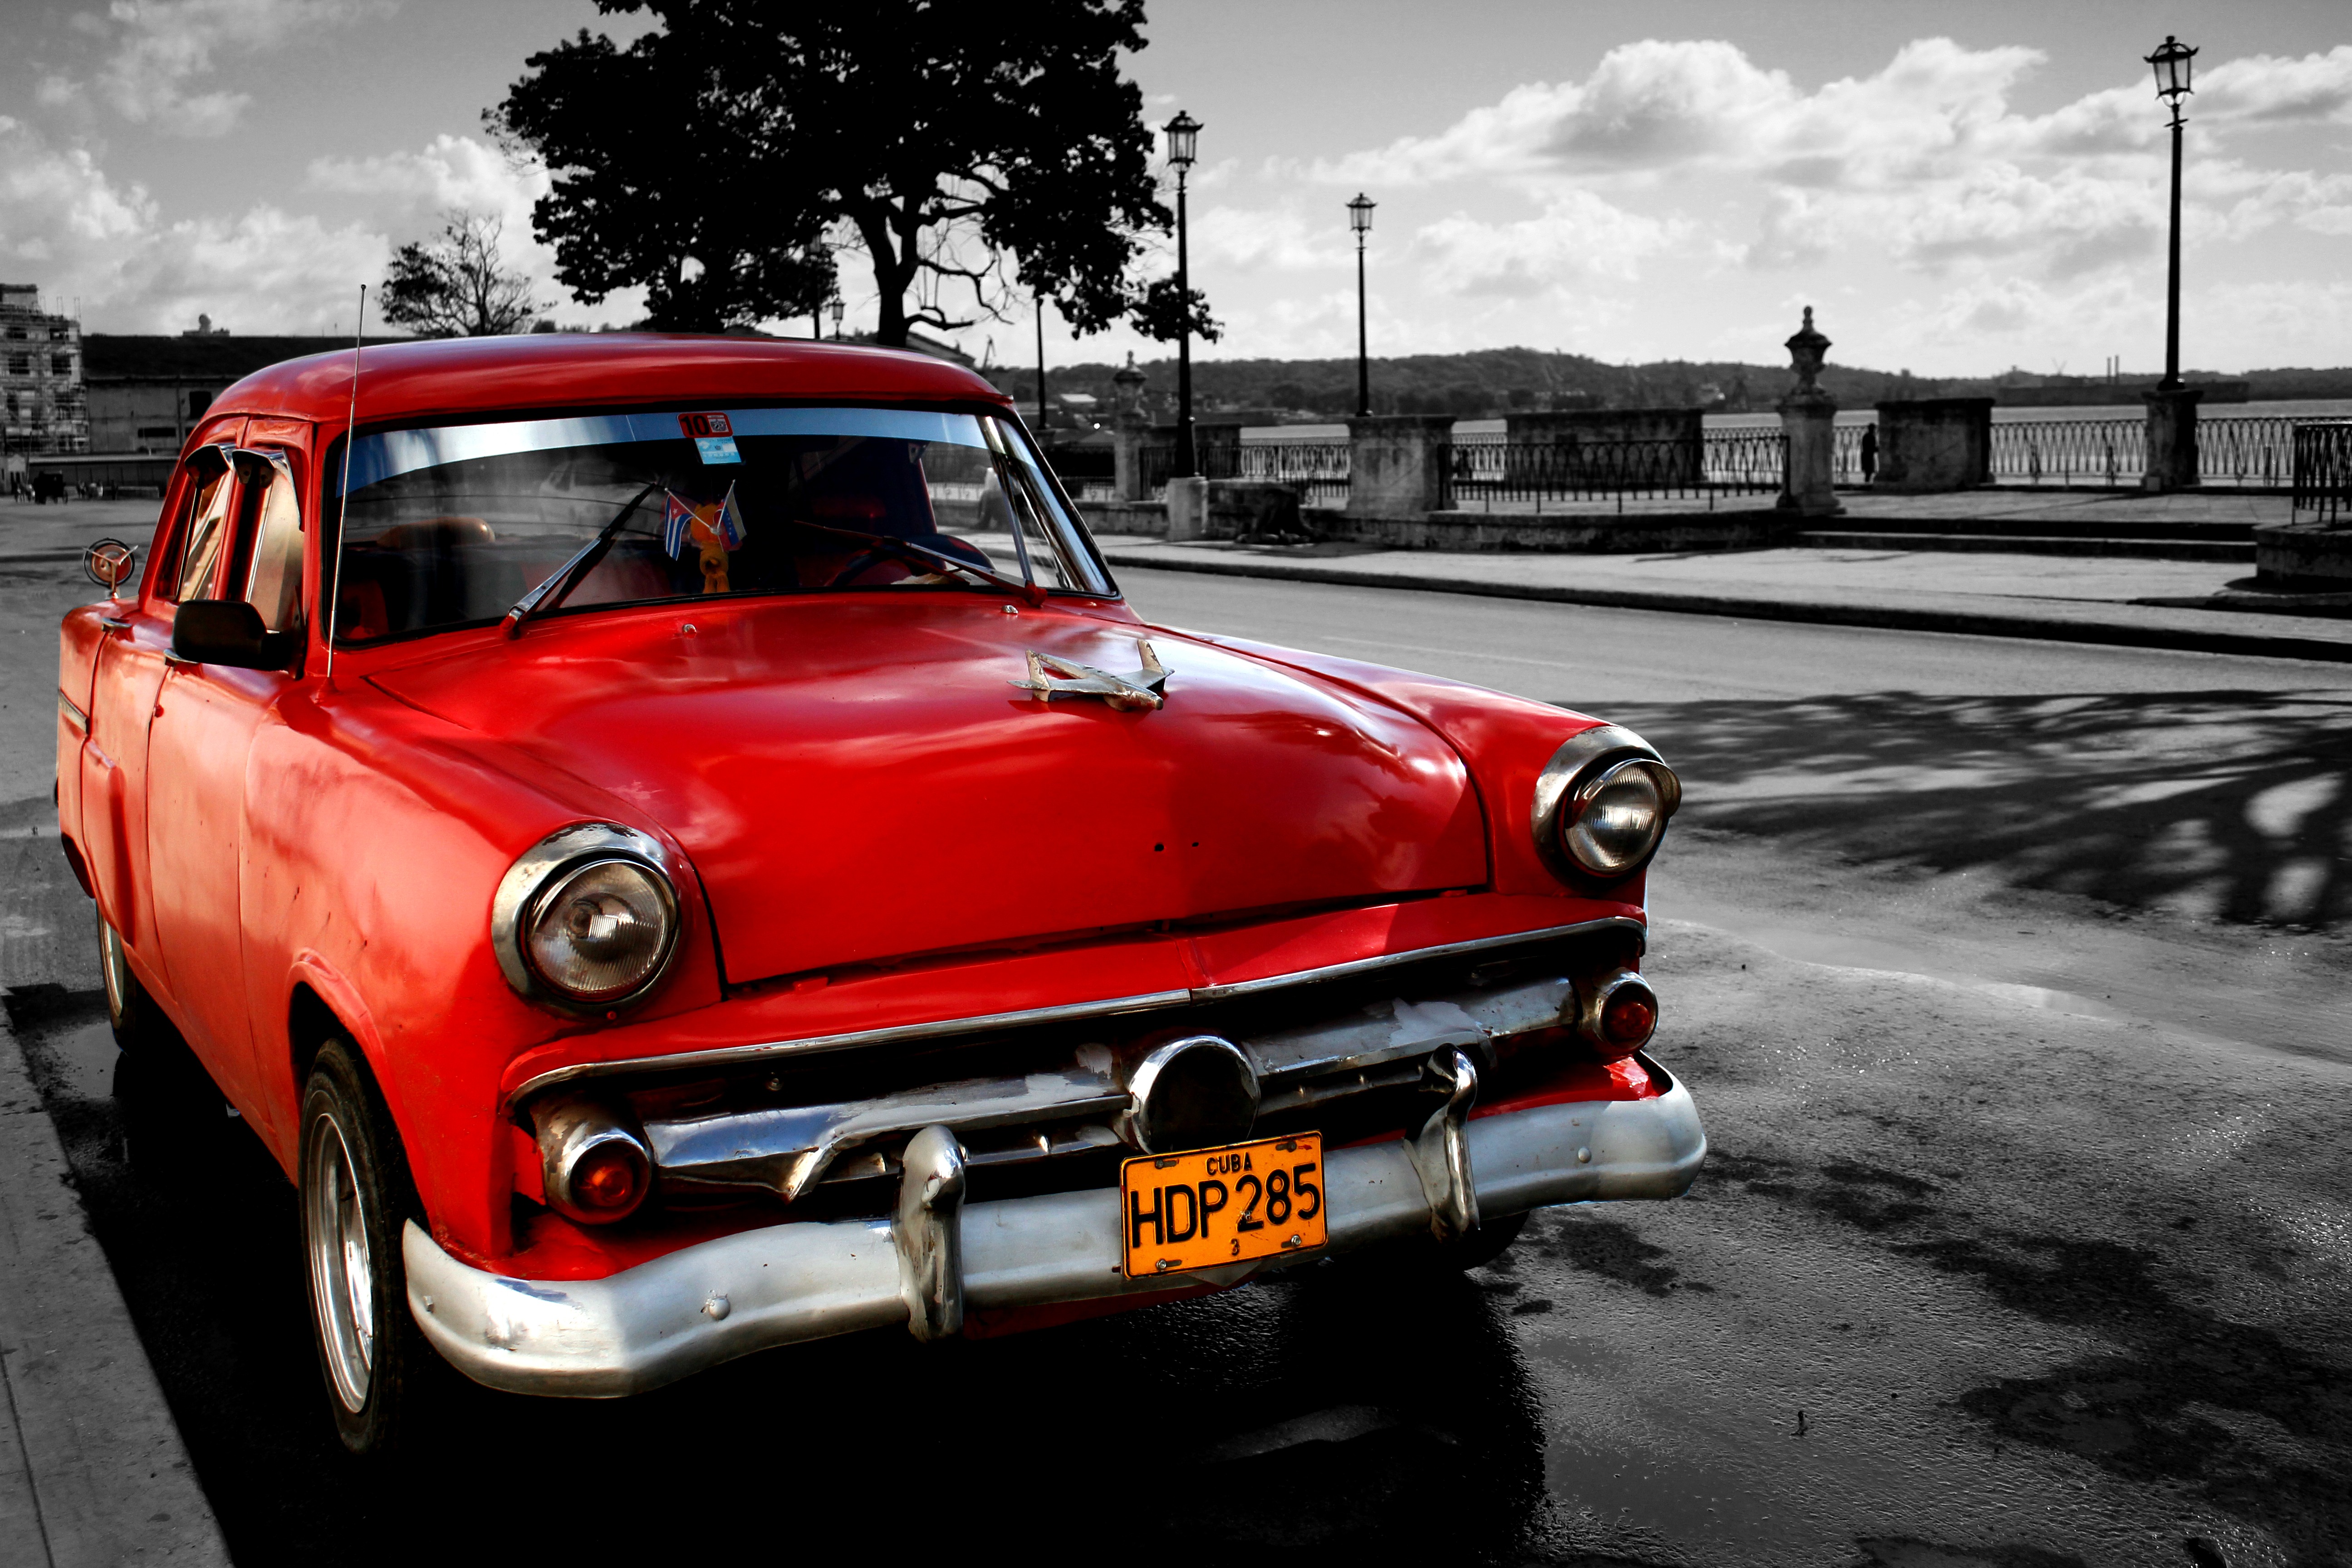 Free photo A red vintage car in Cuba.